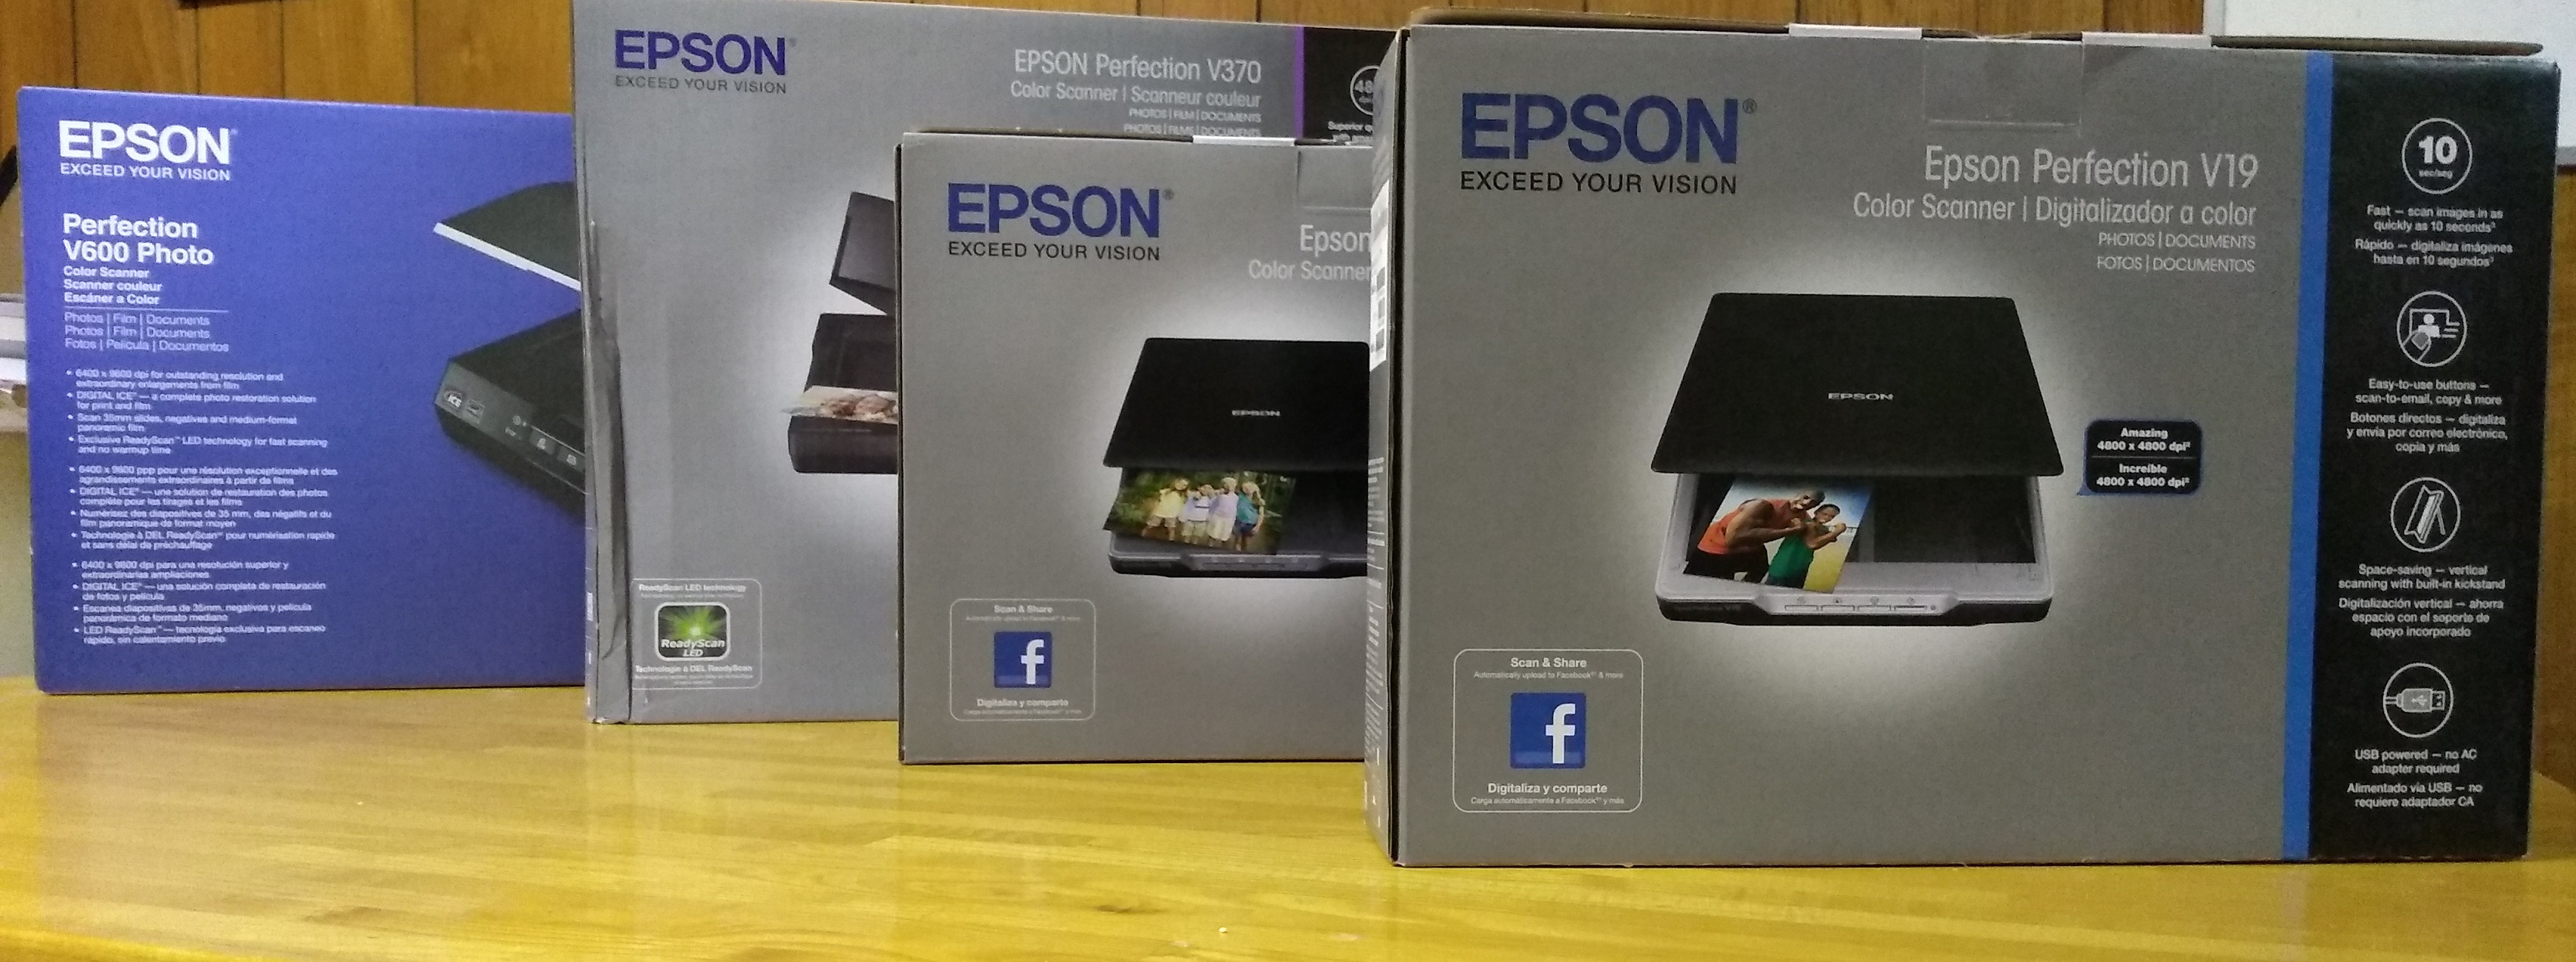 Reviewing the Epson Perfection photo scanners